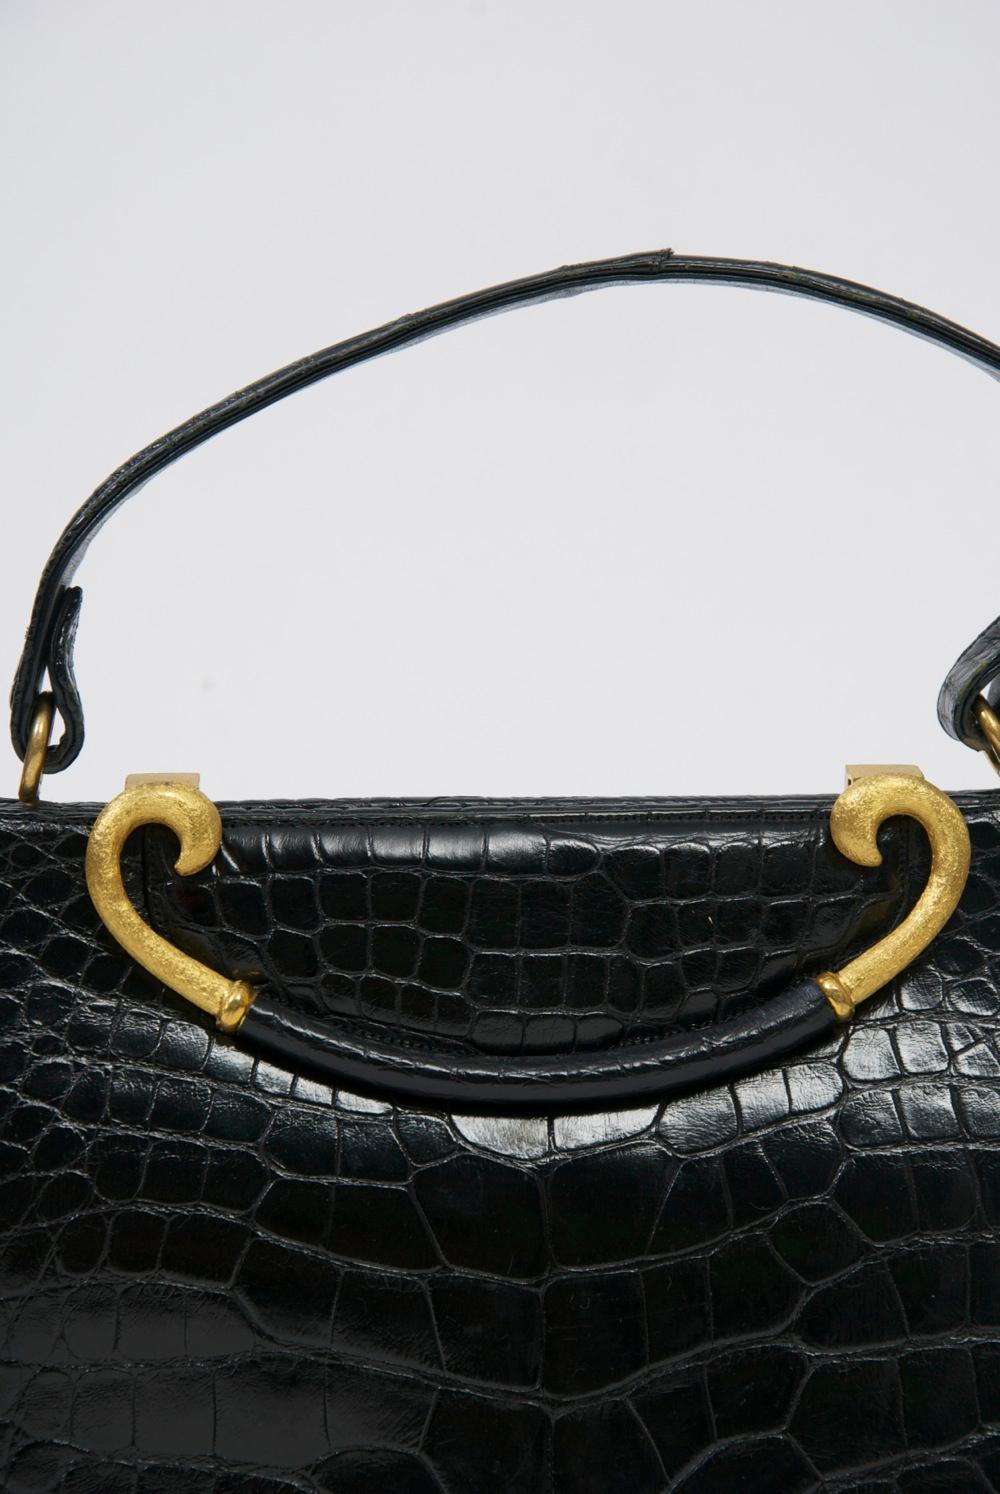 Classic 1960s handbag by Rosenfeld in black leather stamped to resemble alligator, its outstanding feature the curved clasp of brushed goldtone metal with leather center that lifts up to open the bag. The rich interior is of red leather with side